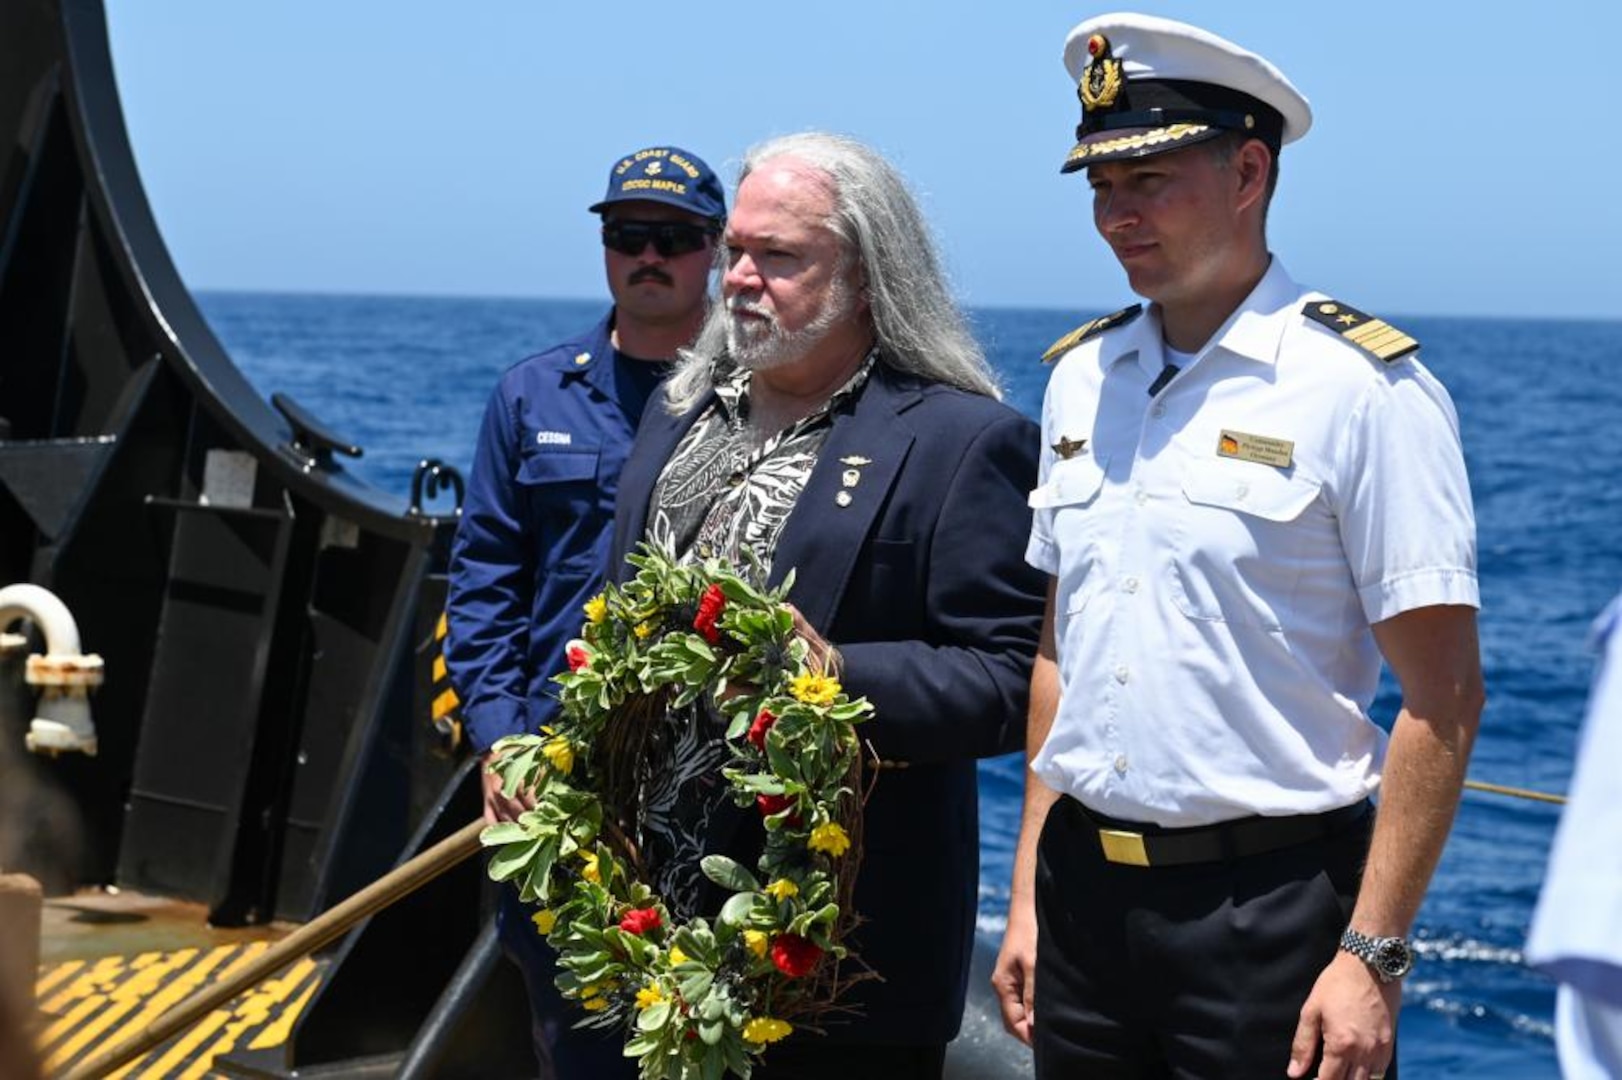 Commander Philipp Mandau, the Assistant Naval Attaché to the United States for the Federal Republic of Germany, and Gary Thomas, retired Coast Guard Commander, lay a wreath at the sight of a sunken German U-boat on the Maple buoy deck at the Graveyard of the Atlantic, June 13, 2022. The crew of the Maple commemorated lives lost by visiting two sunken Coast Guard Cutters and a German U-boat. (U.S. Coast Guard photo by Petty Officer 3rd Class Kimberly Reaves)